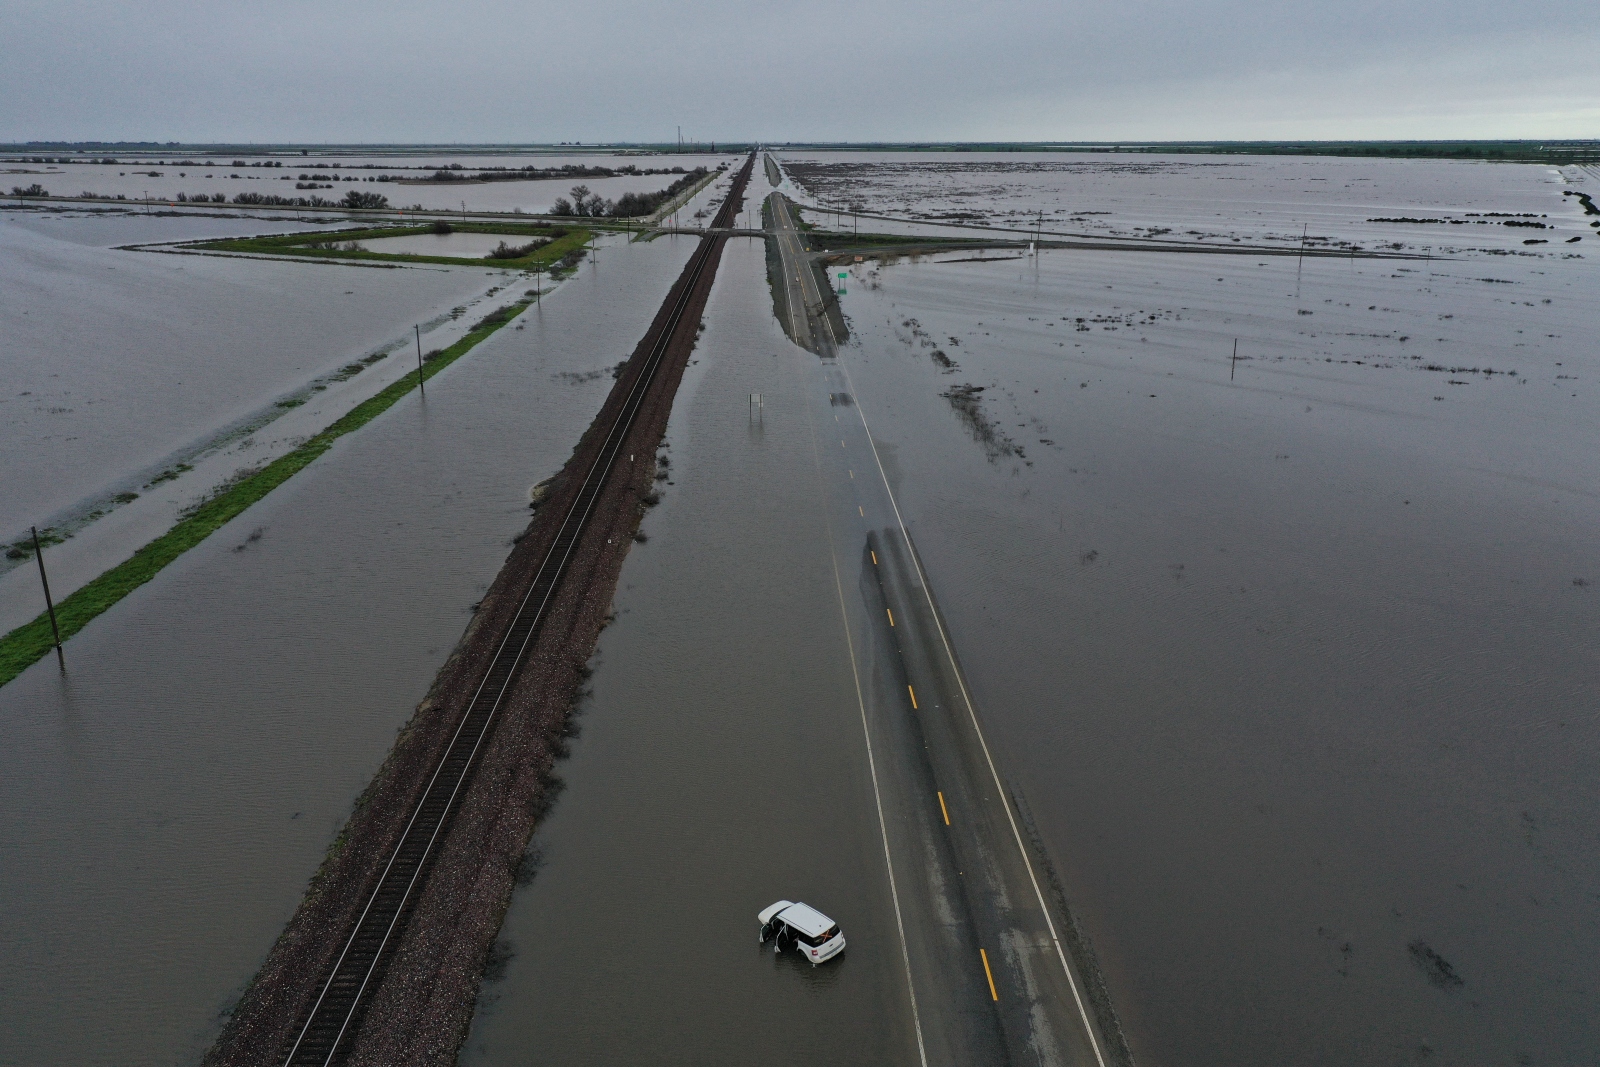 A vehicle surrounded by flood waters and flooded farmland near Allensworth, California. Much of the surrounding area has flooded as Tulare Lake reappears.